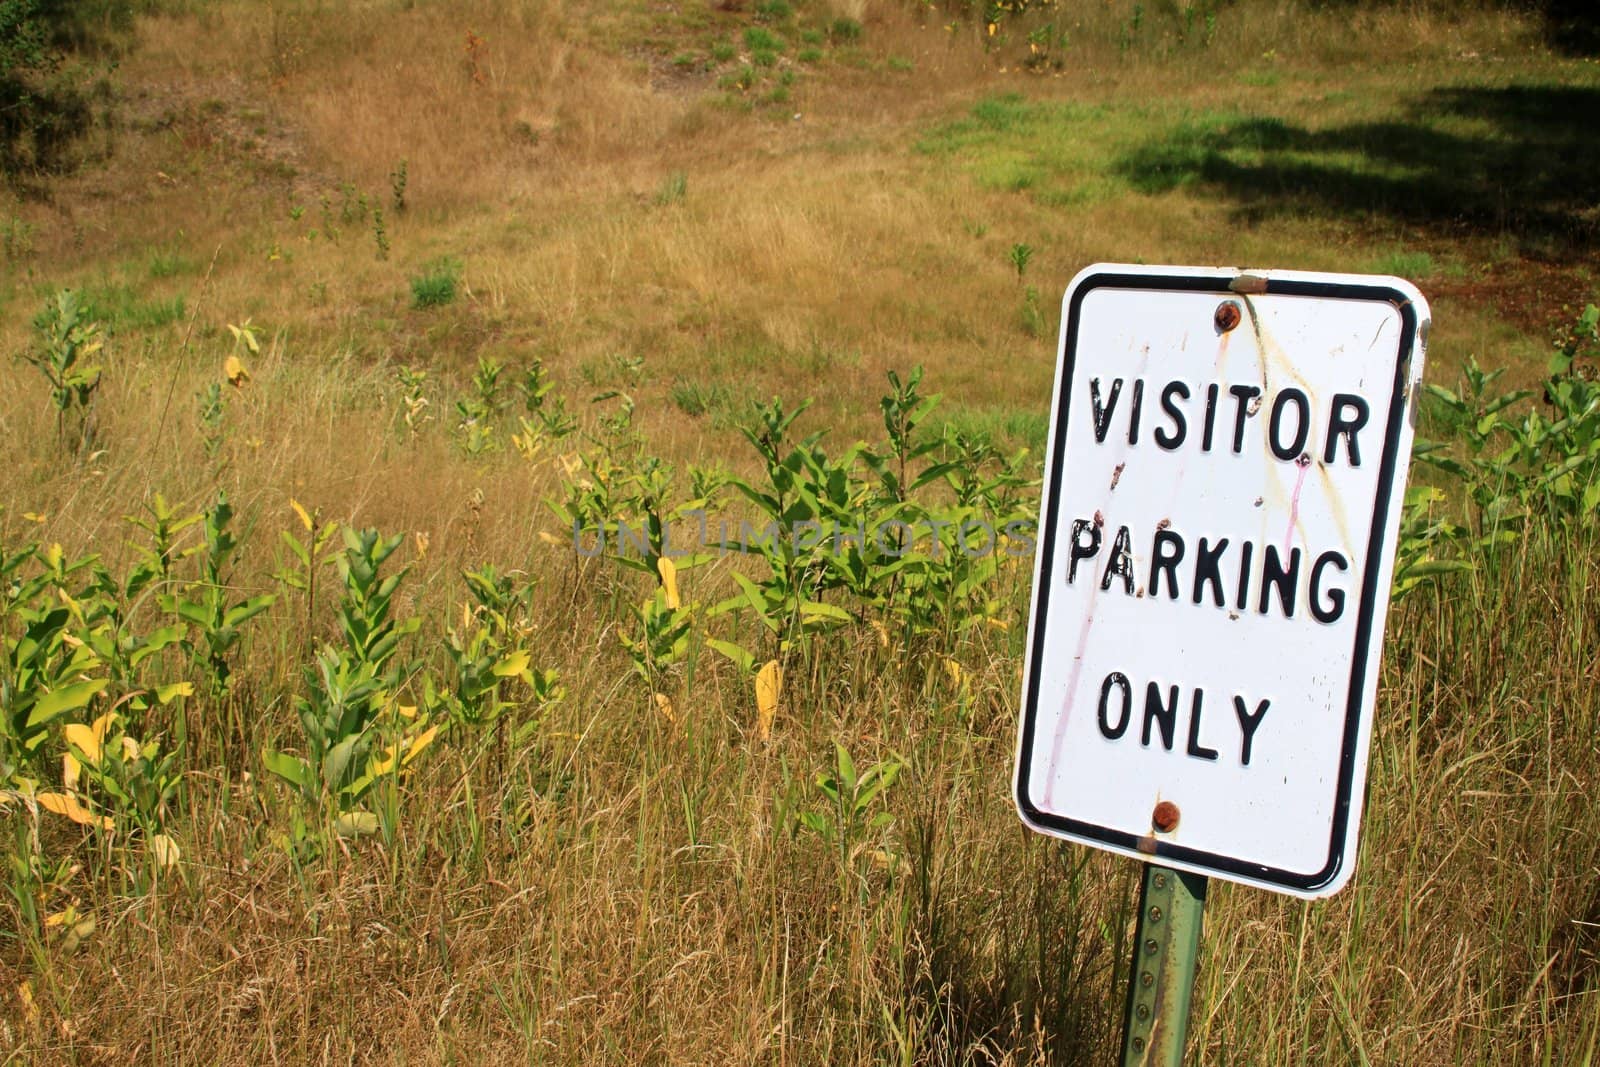 Parking sign for visitors in the middle of a field